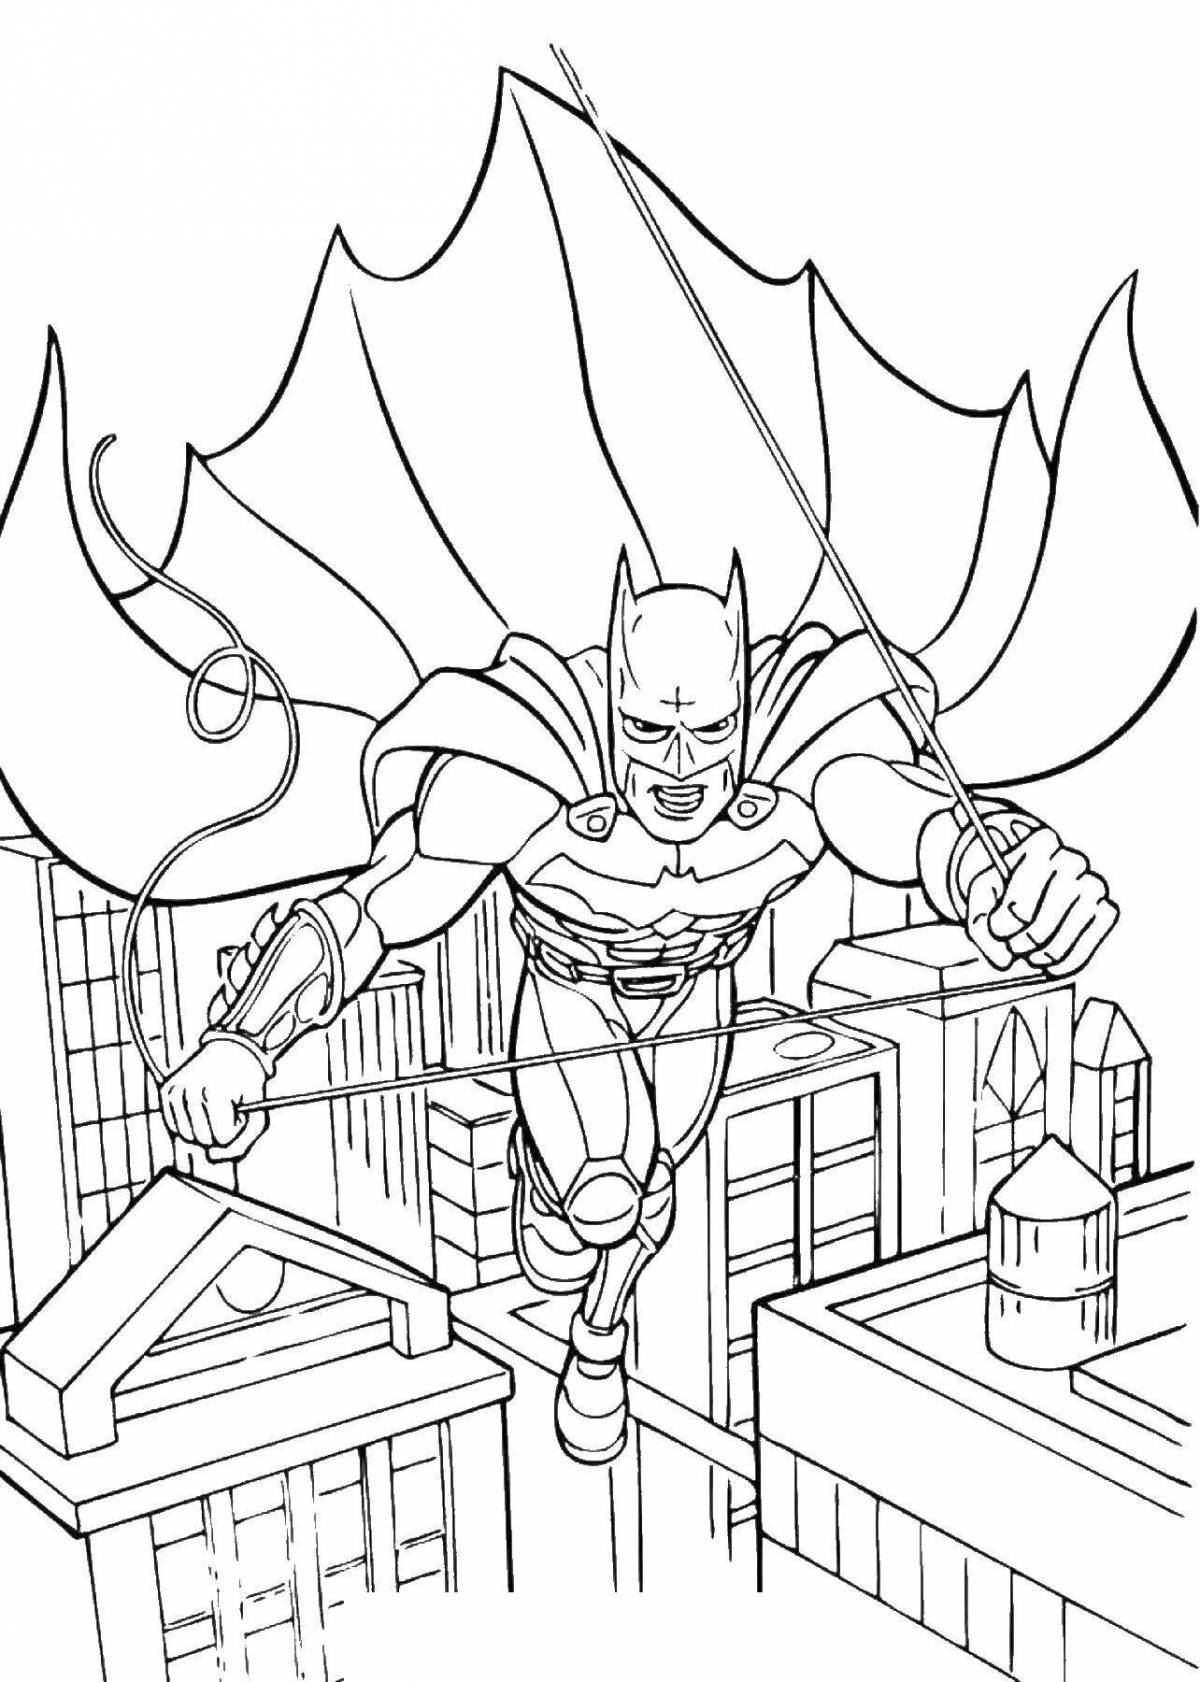 Fantastic superheroes coloring for children 5-6 years old